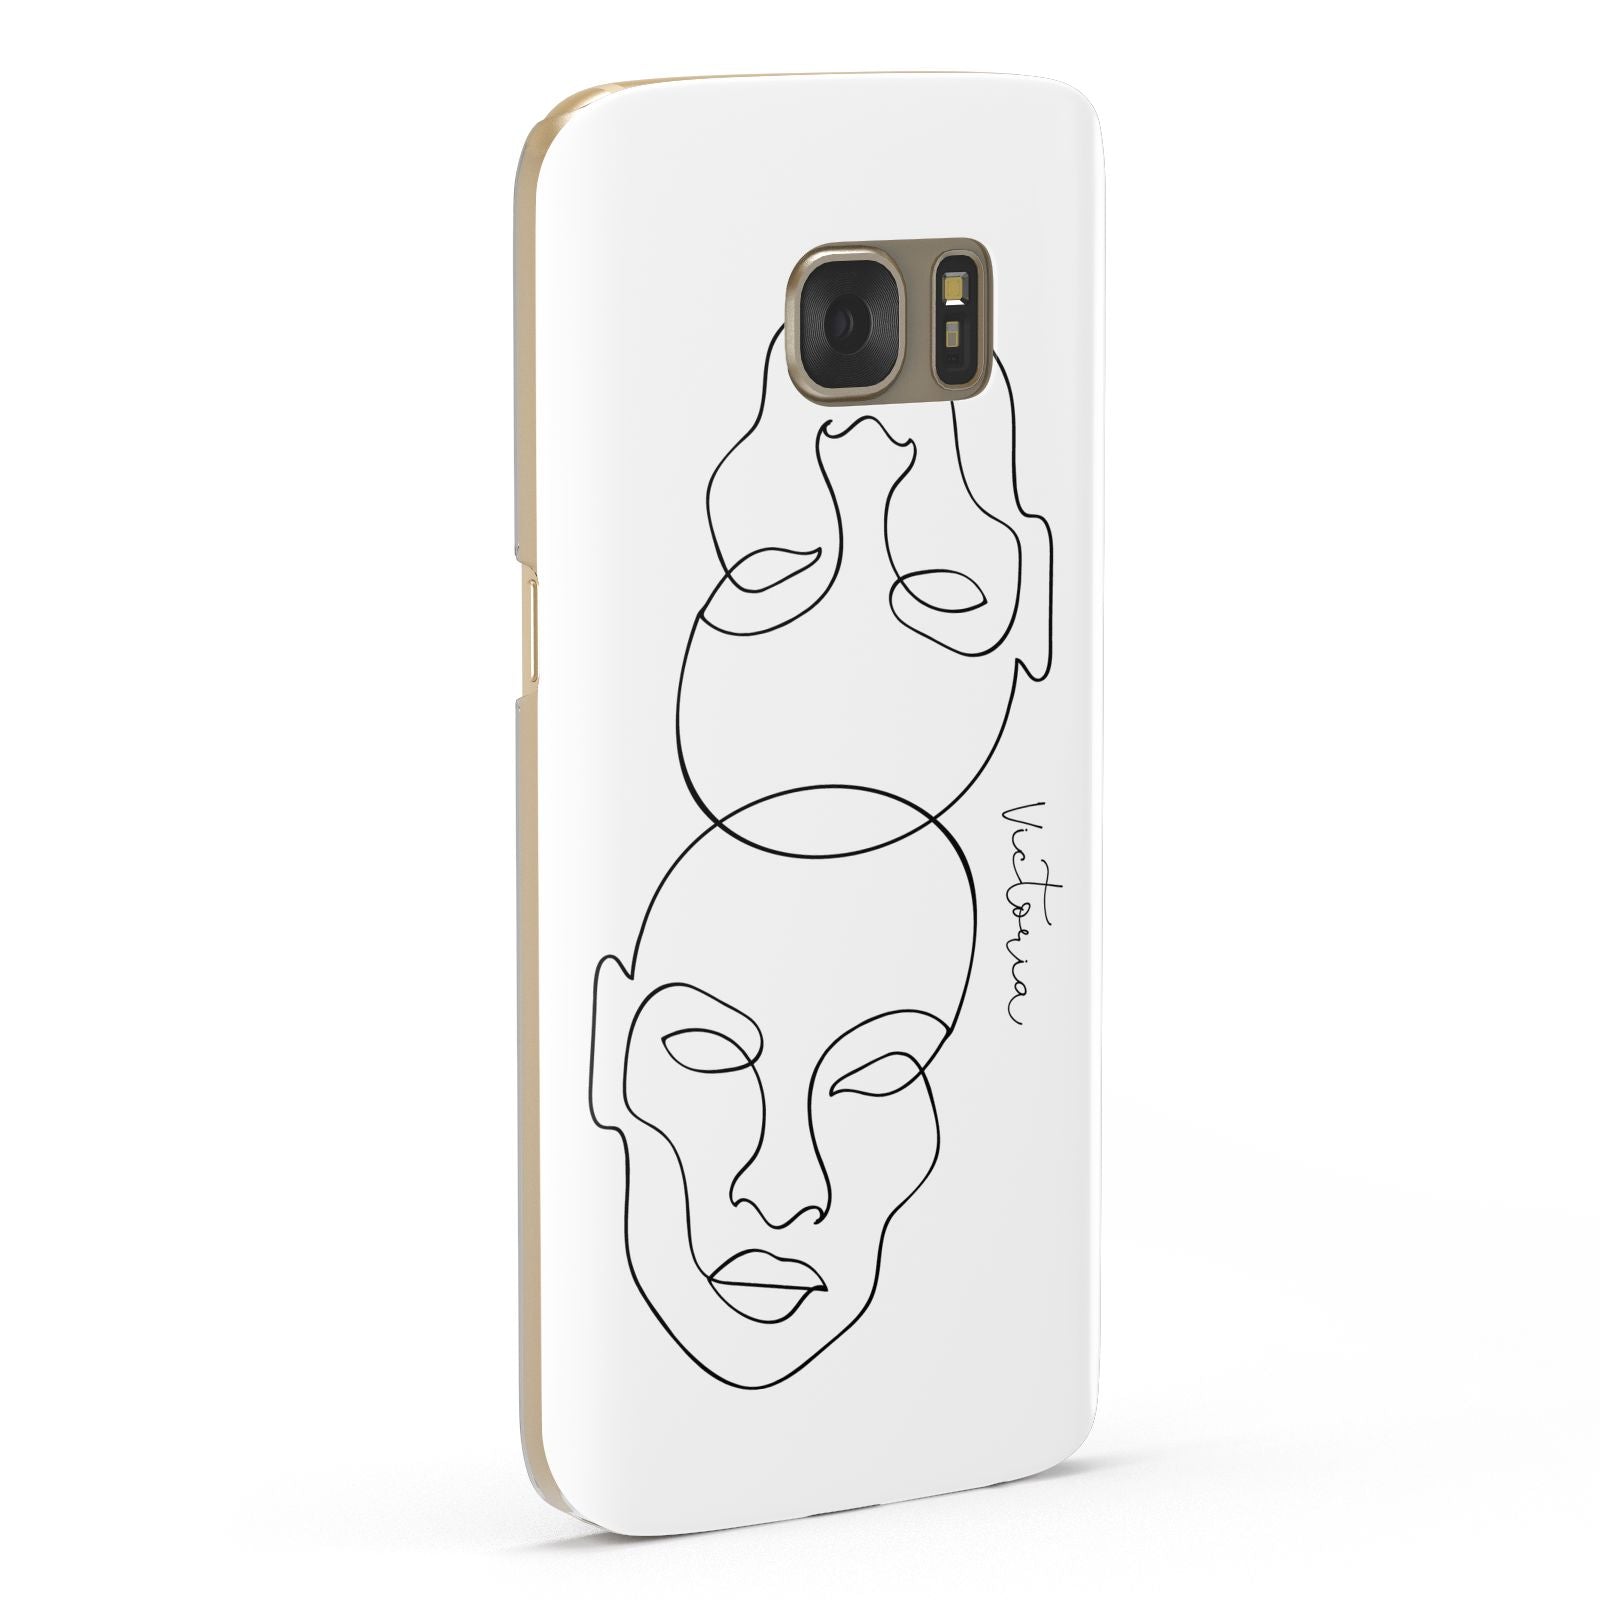 Personalised White Line Art Samsung Galaxy Case Fourty Five Degrees